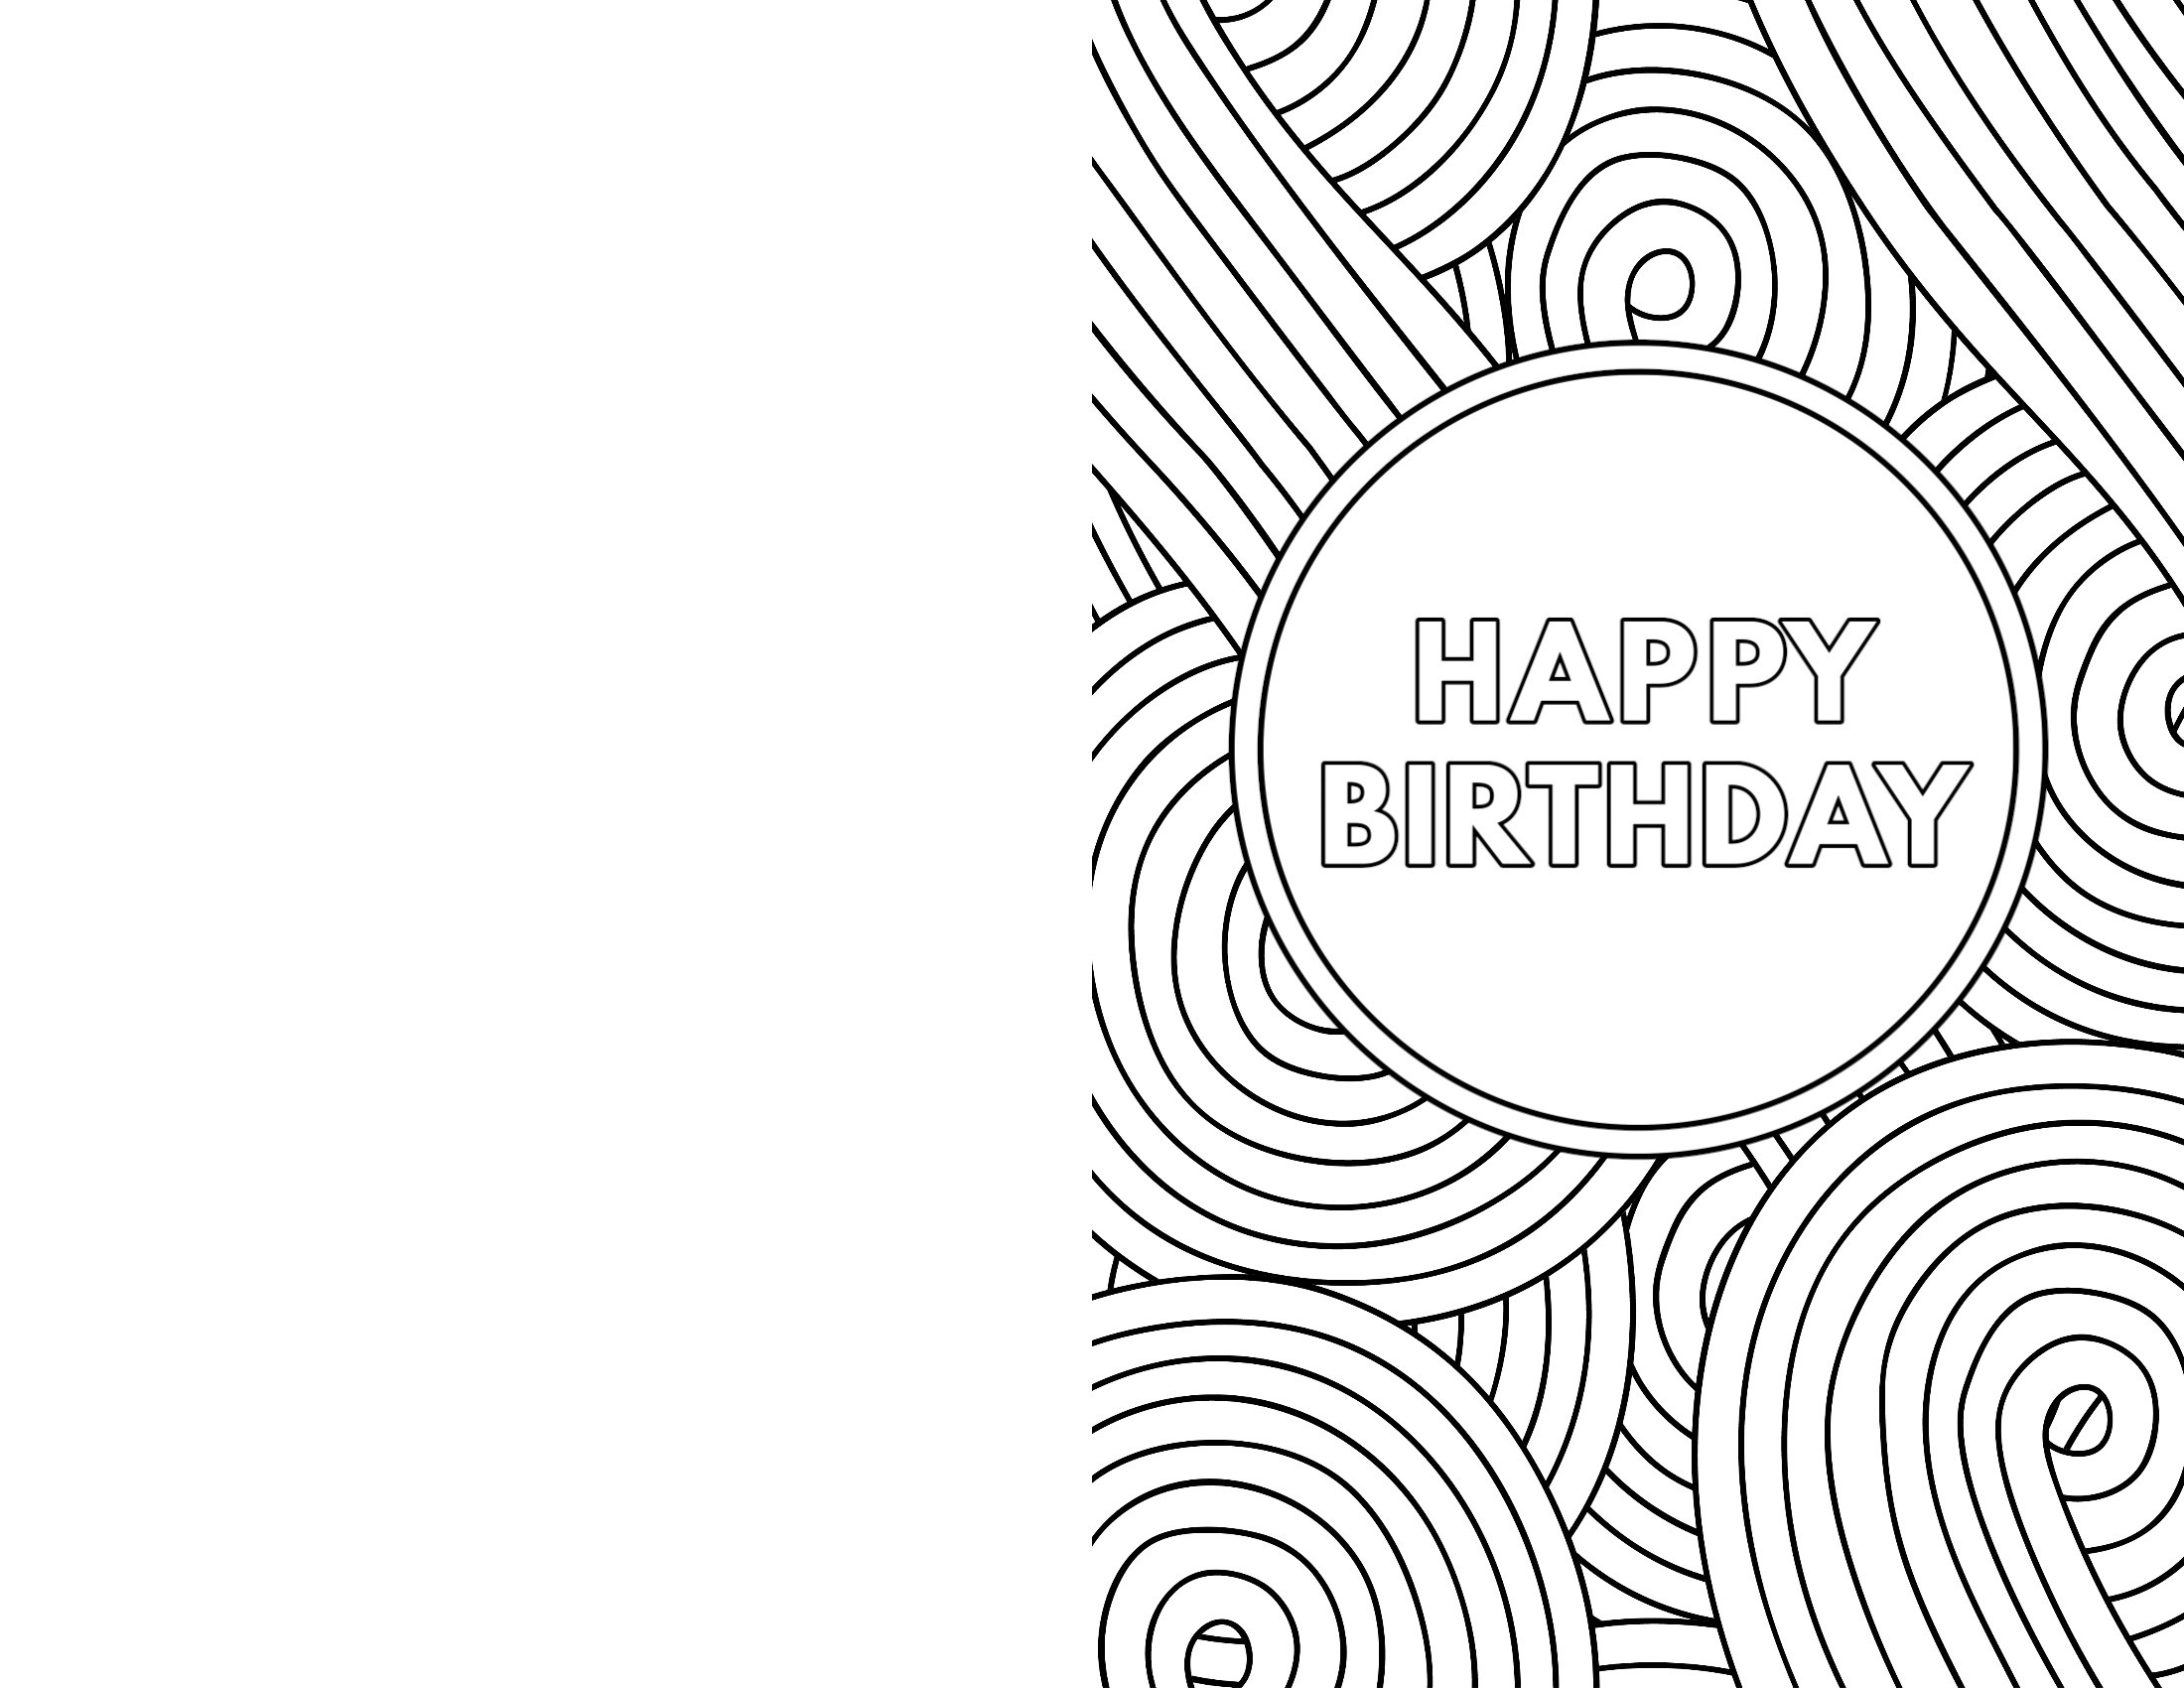 Free Printable Birthday Cards - Paper Trail Design - Free Printable Birthday Cards To Color